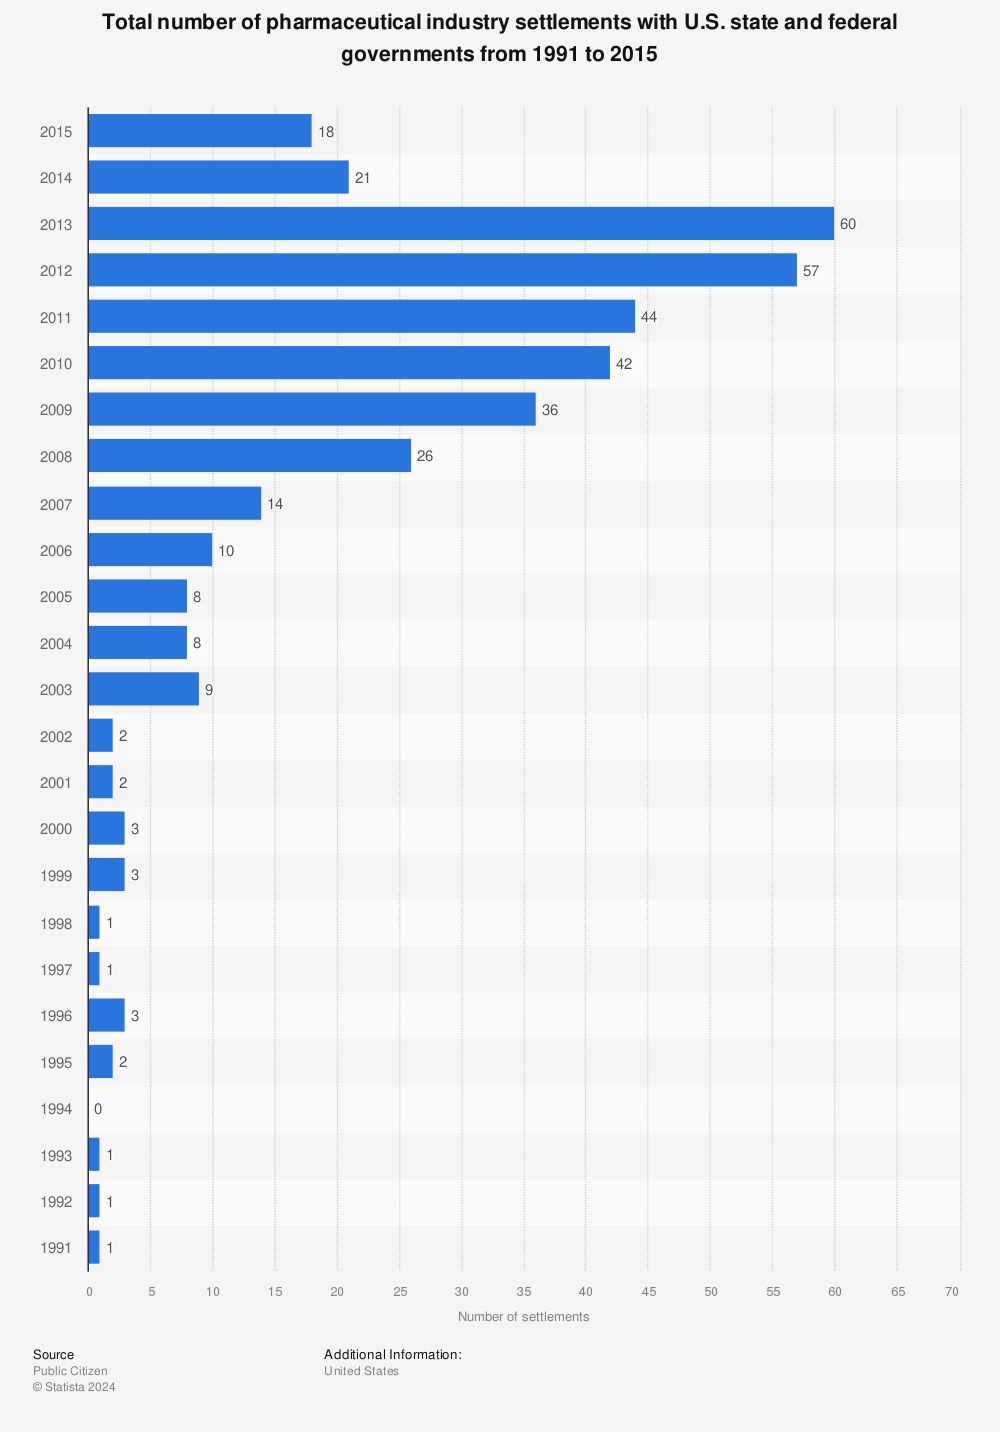 Statistic: Total number of pharmaceutical industry settlements with U.S. state and federal governments from 1991 to 2015 | Statista